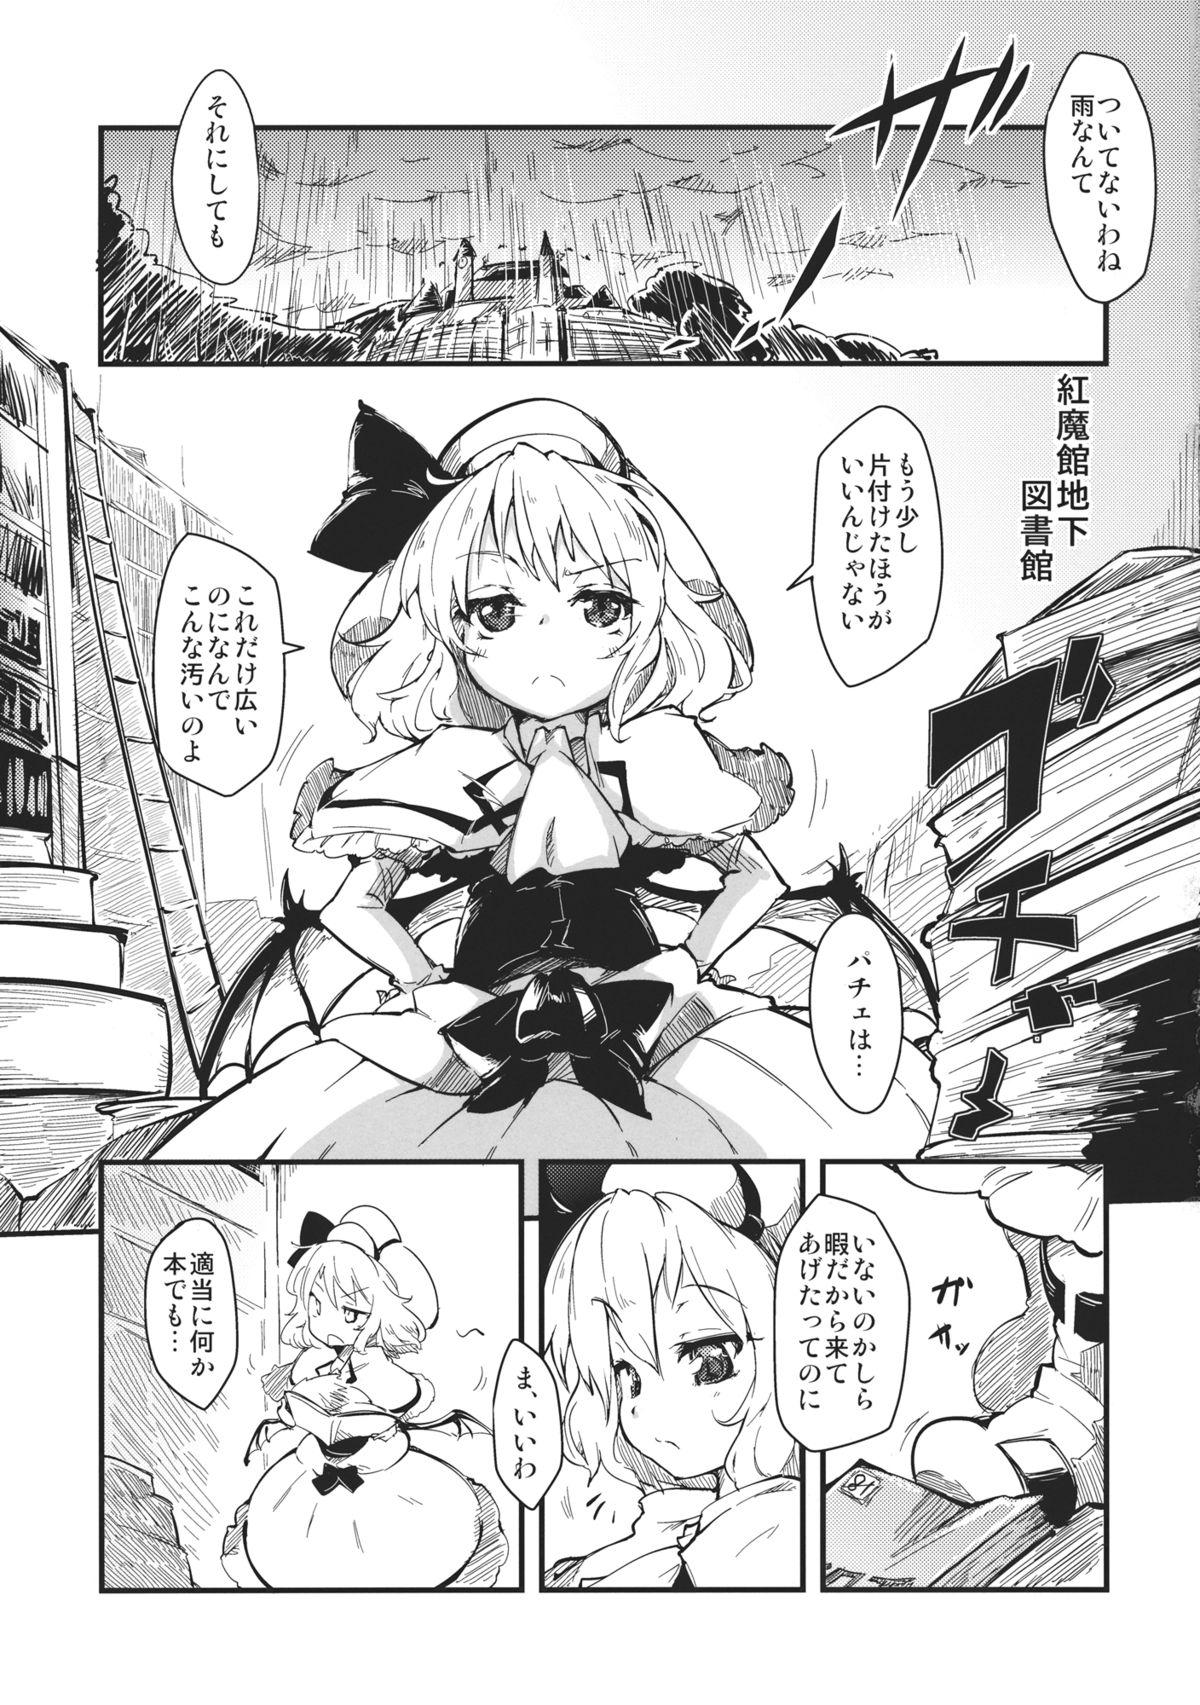 Office Sex LolitaEmpress - Touhou project Milf Cougar - Page 3